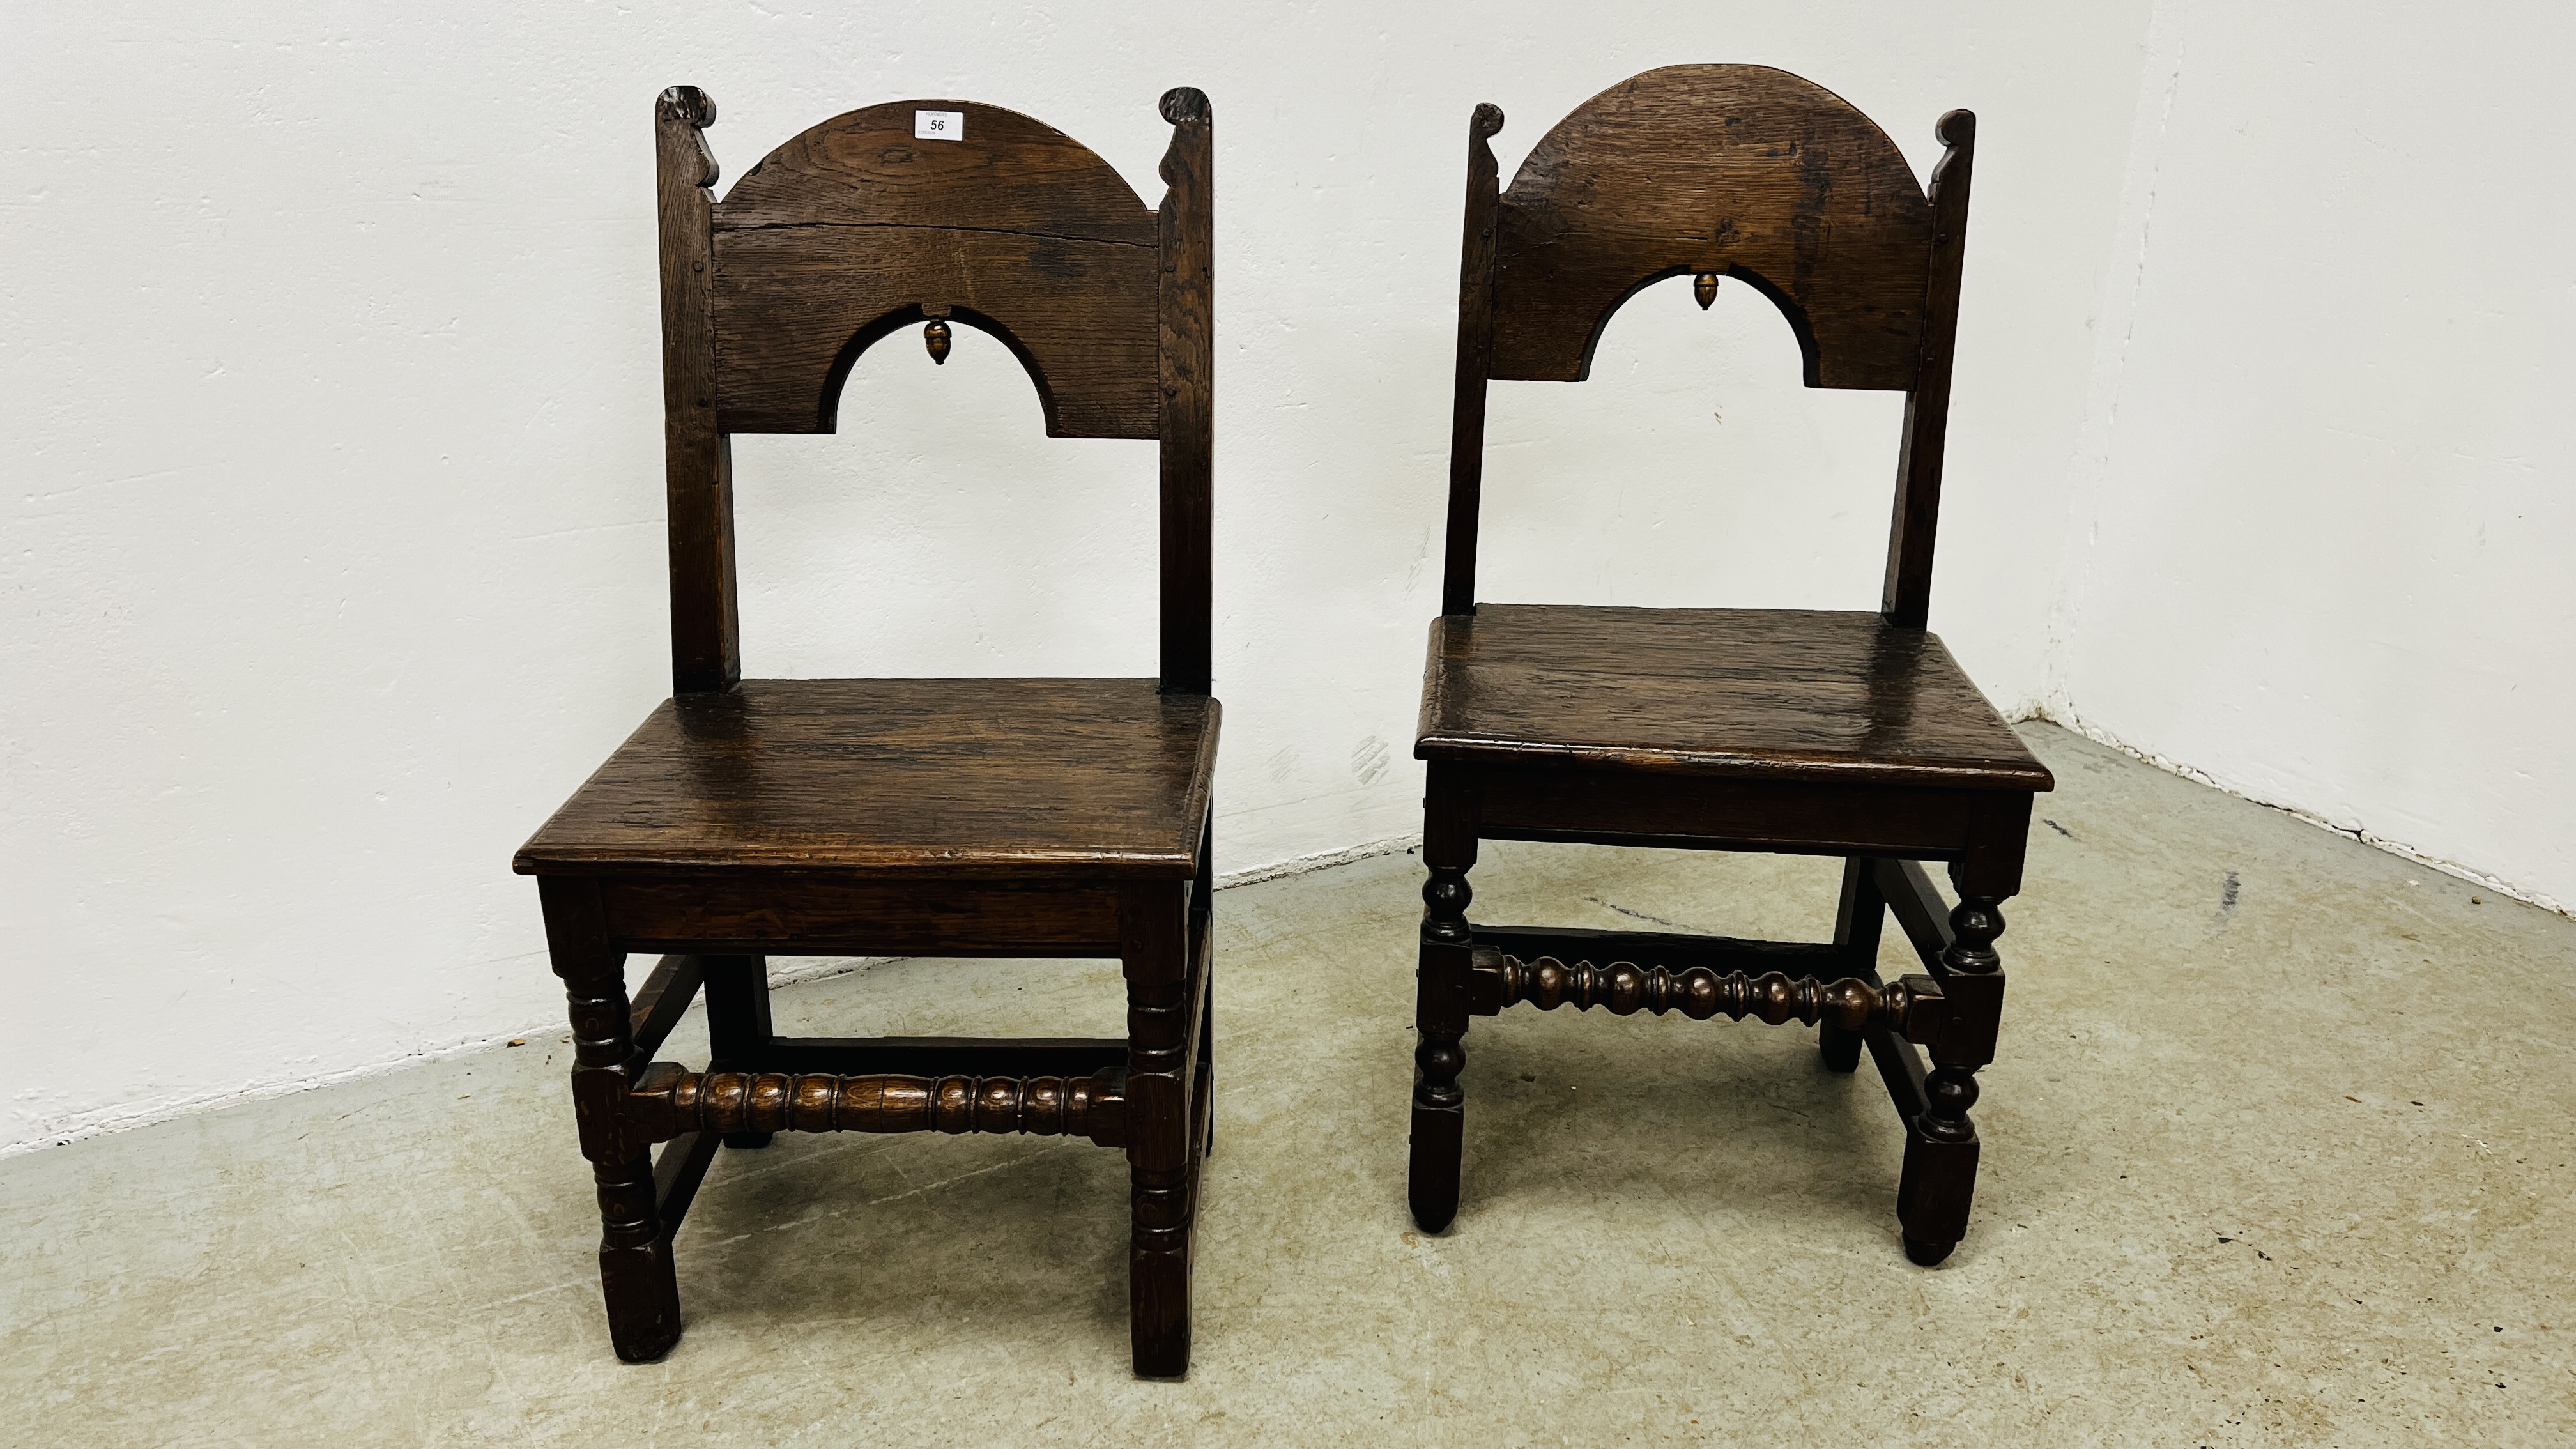 A PAIR OF 17TH CENTURY JOINED OAK CHAIRS, POSSIBLY NORTH COUNTRY.